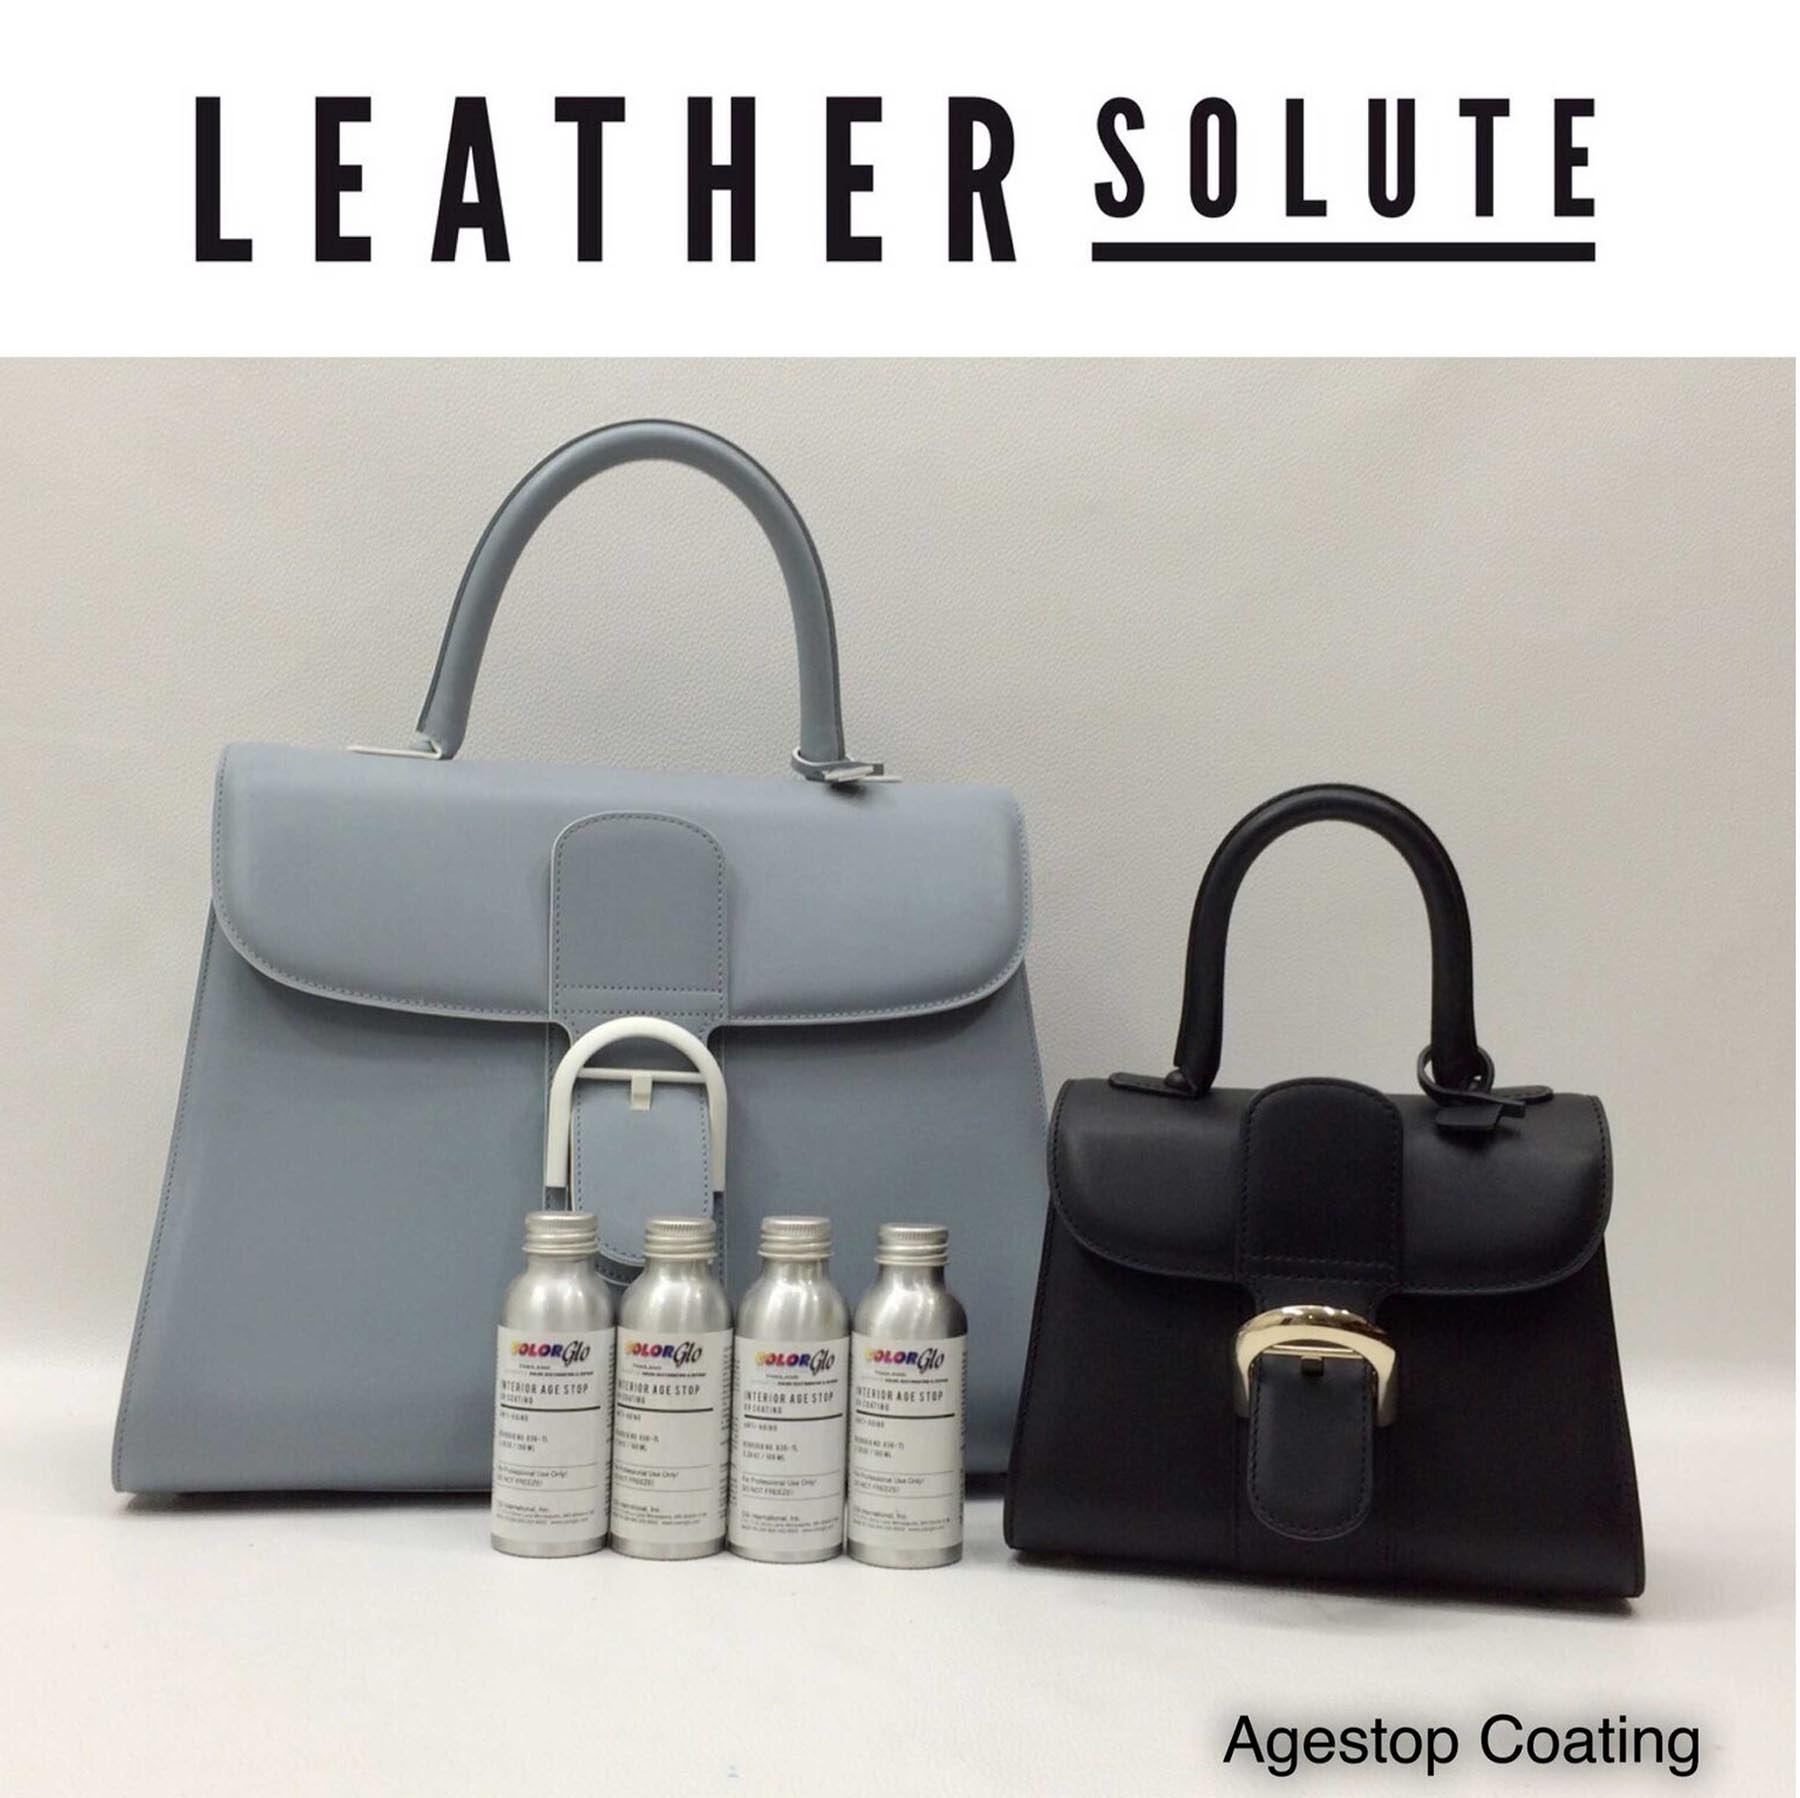 //www.leathersolute.co.th/wp-content/uploads/2018/11/age-stop-coating-3.jpg